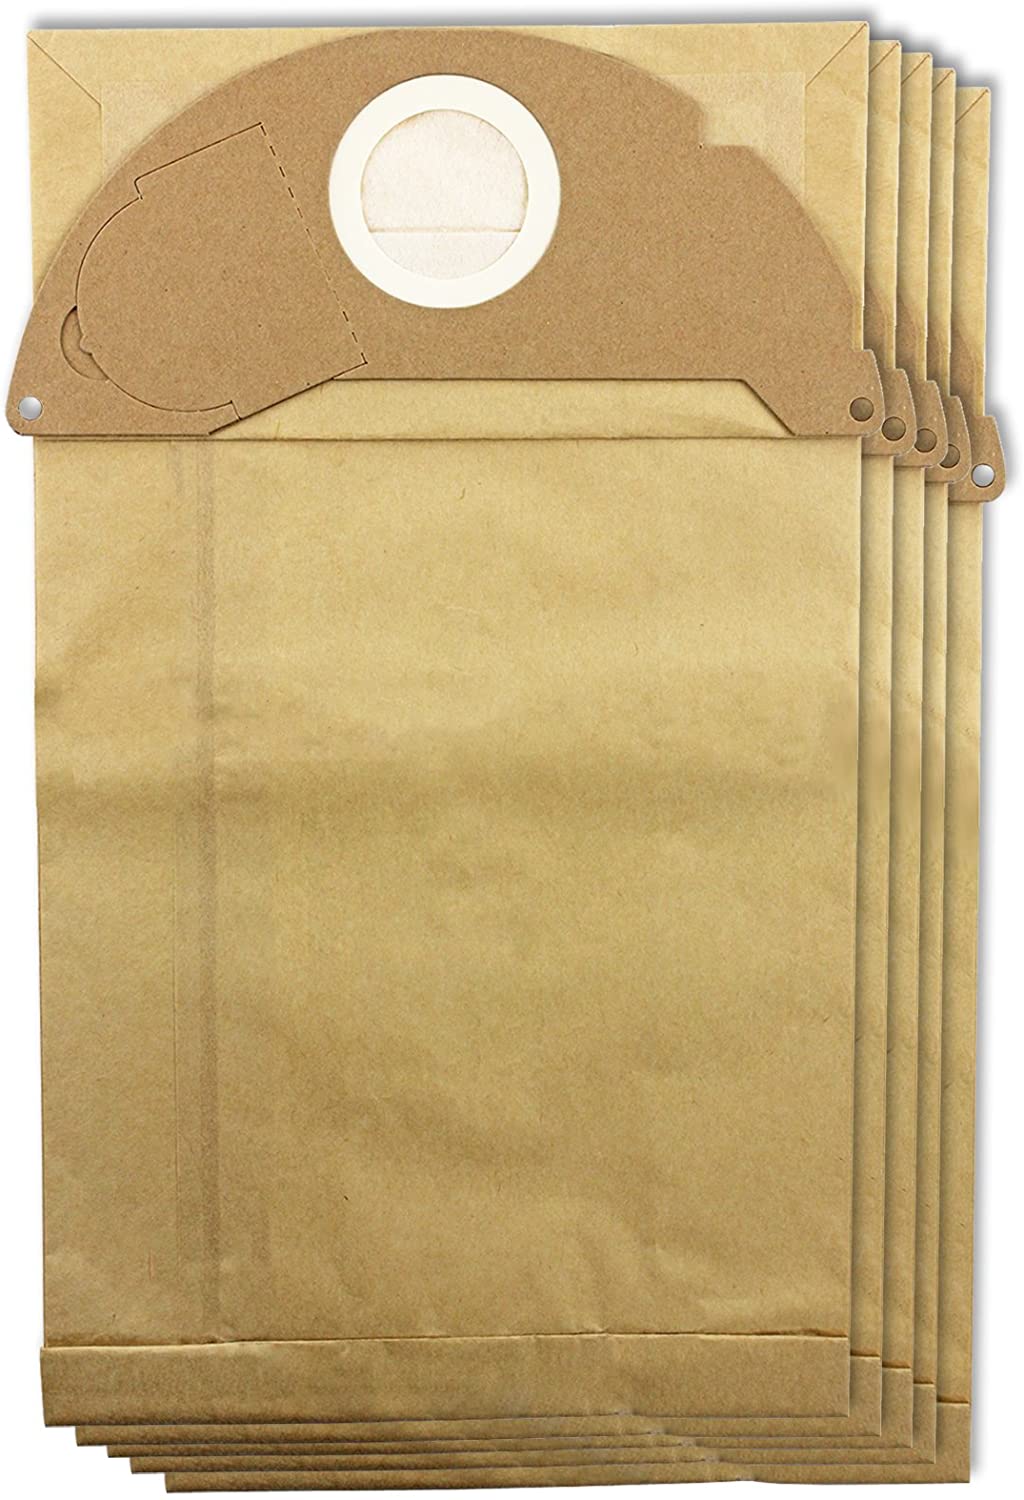 Strong Dust Bags for Karcher MV2 IPX4 Vacuum Cleaners (Pack of 5 + Fresheners)